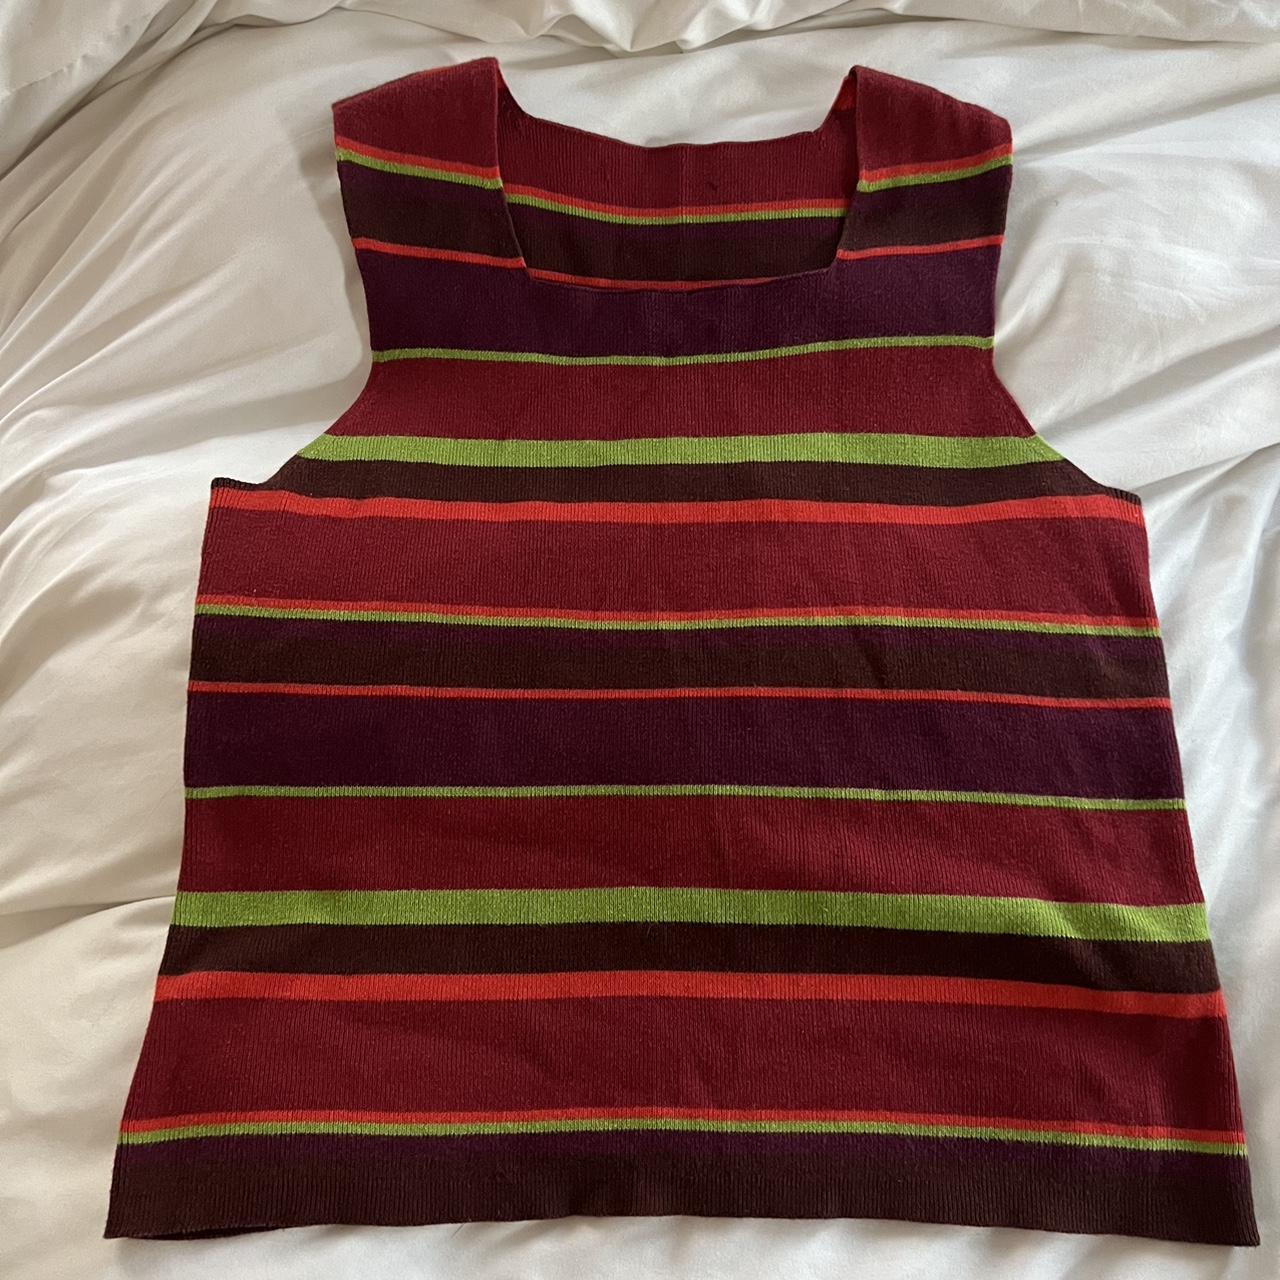 Paloma Wool Women's Burgundy and Green Vest